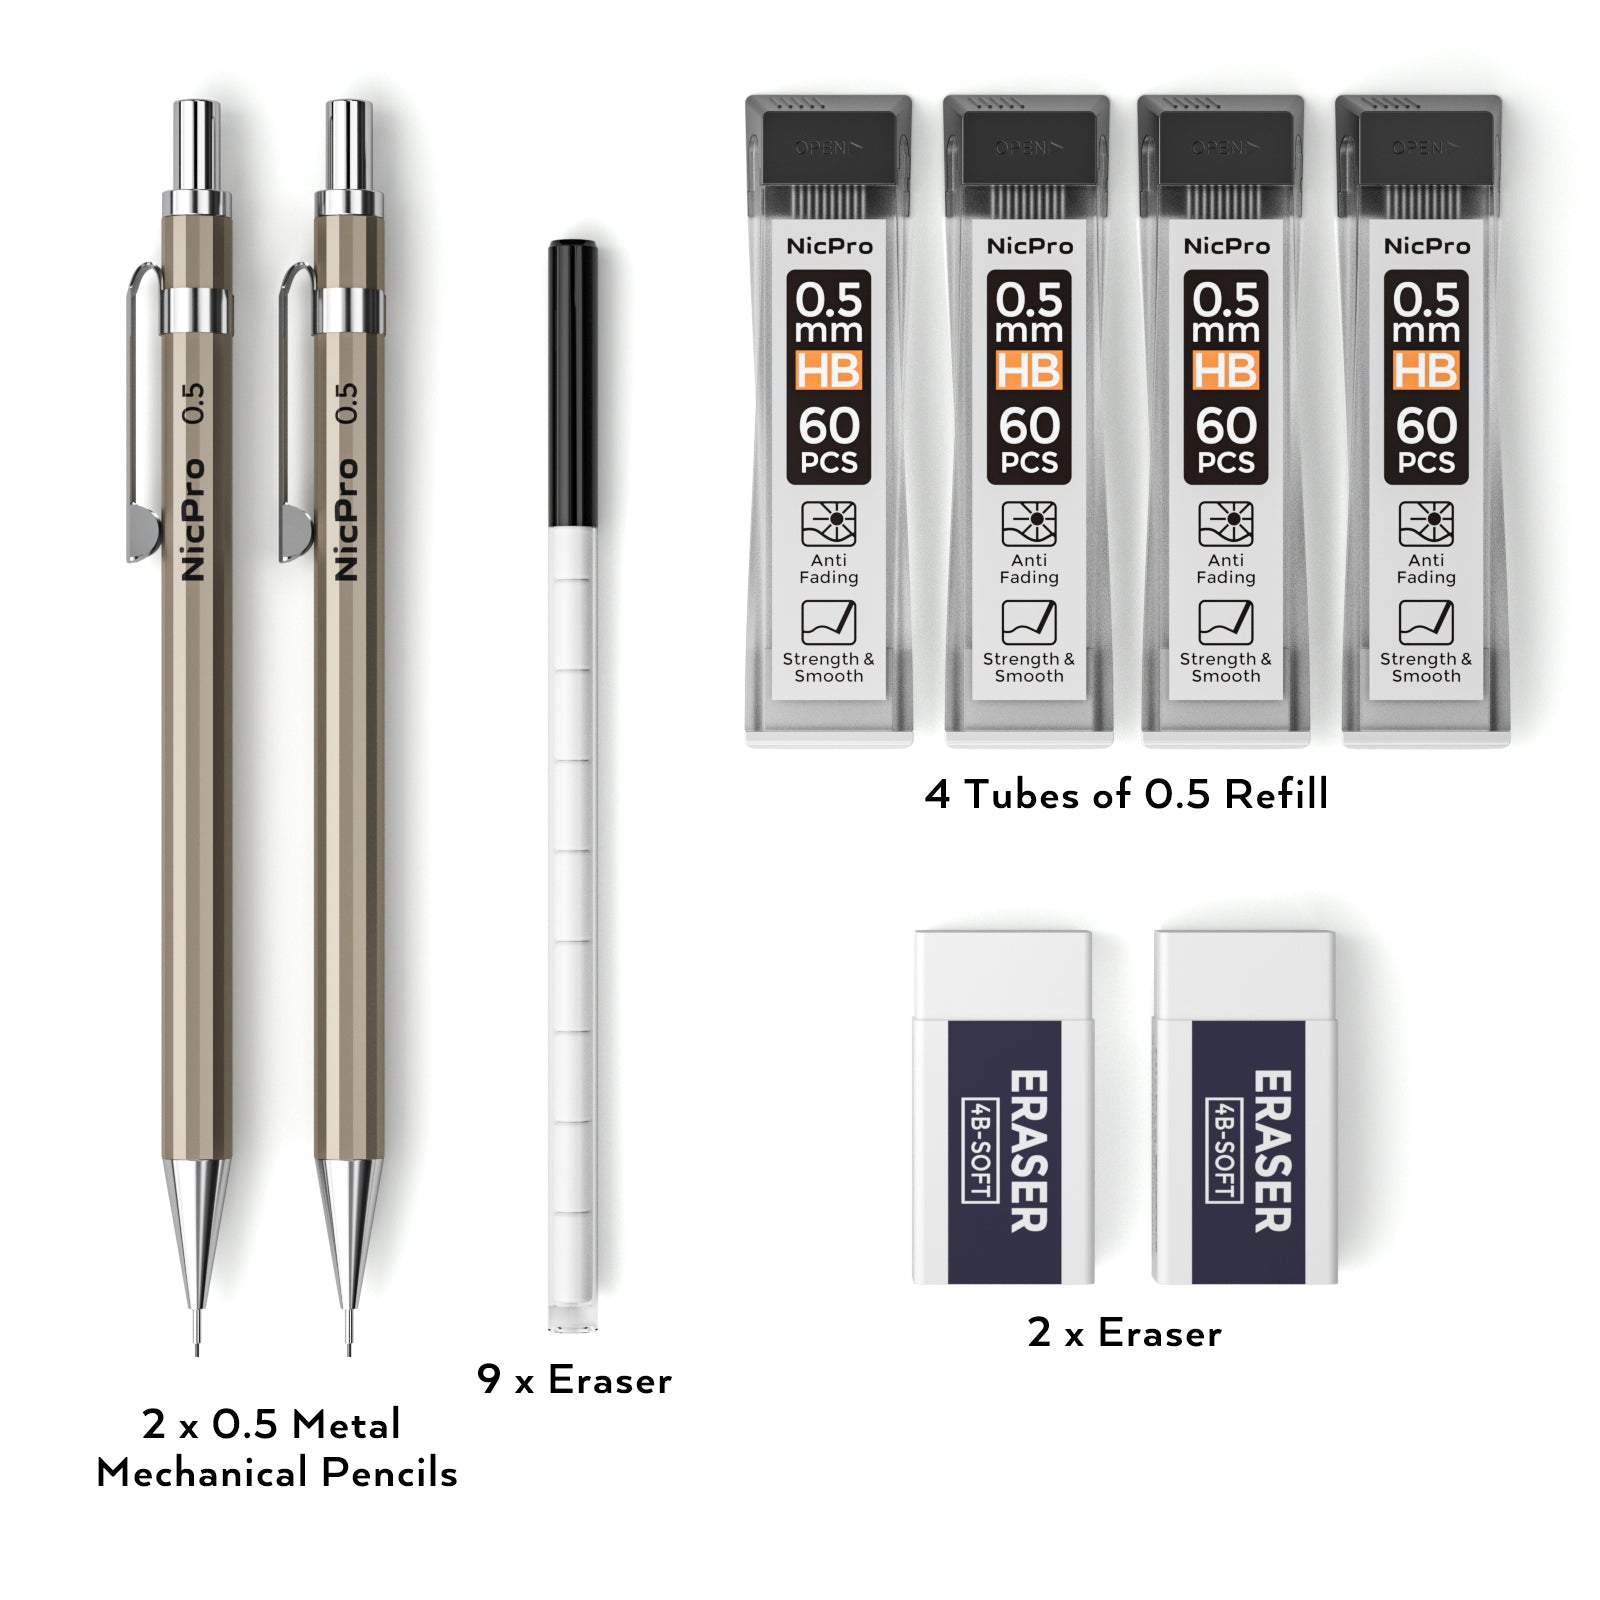 Metal 0.5 mm Mechanical Pencil Set with Case, 2 PCS Nicpro Drafting Pencil with Lead Refill & Erasers for Artist Writing, Drawing Sketching